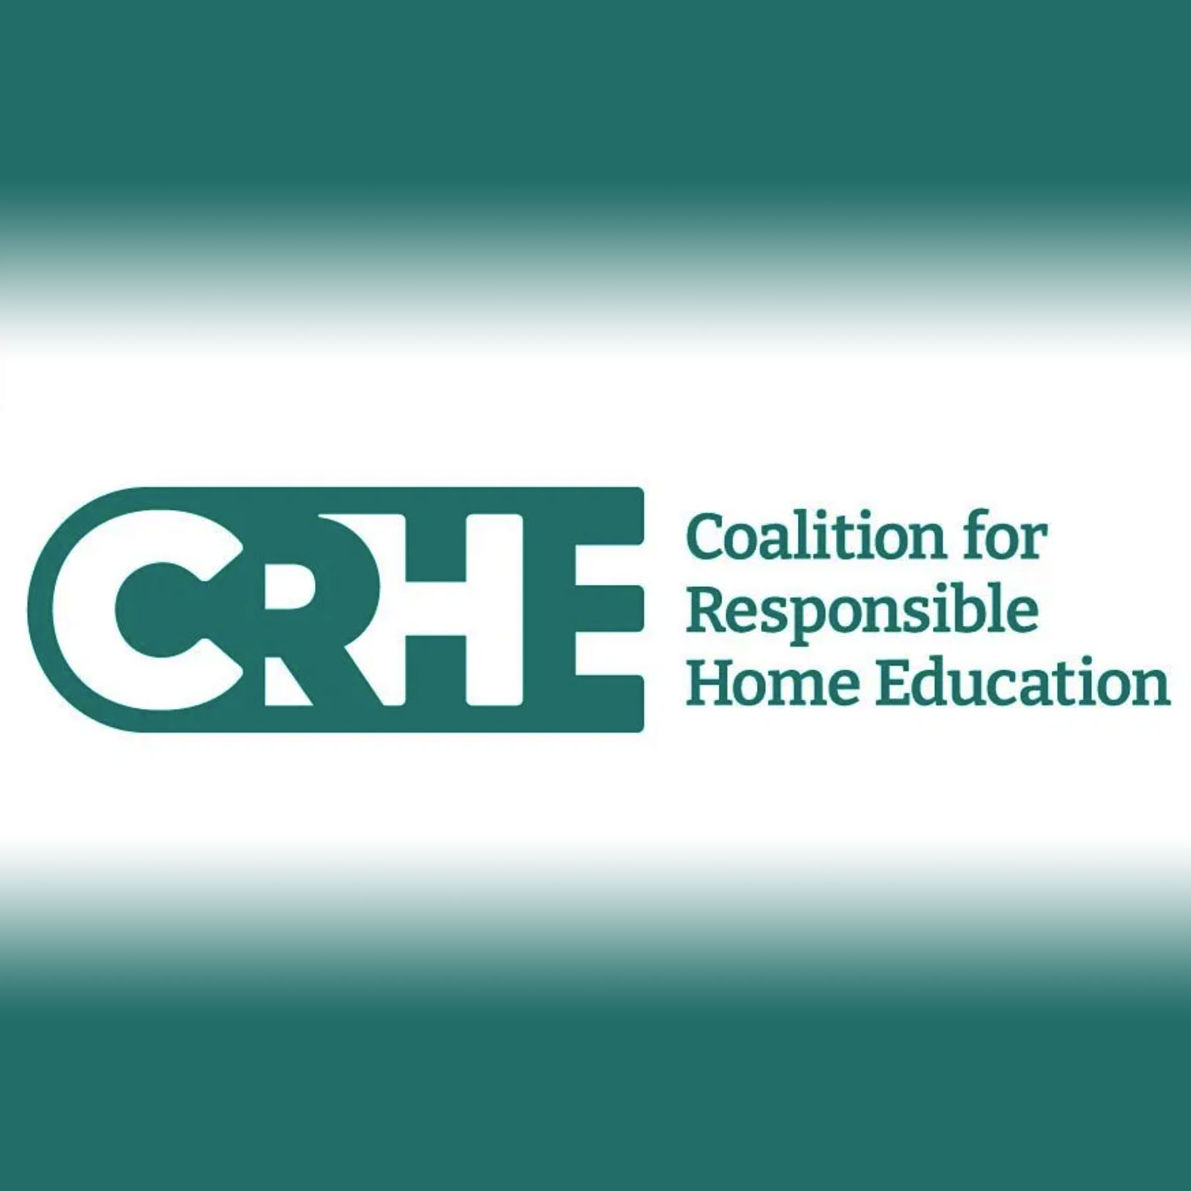 Coalition for Responsible Home Education